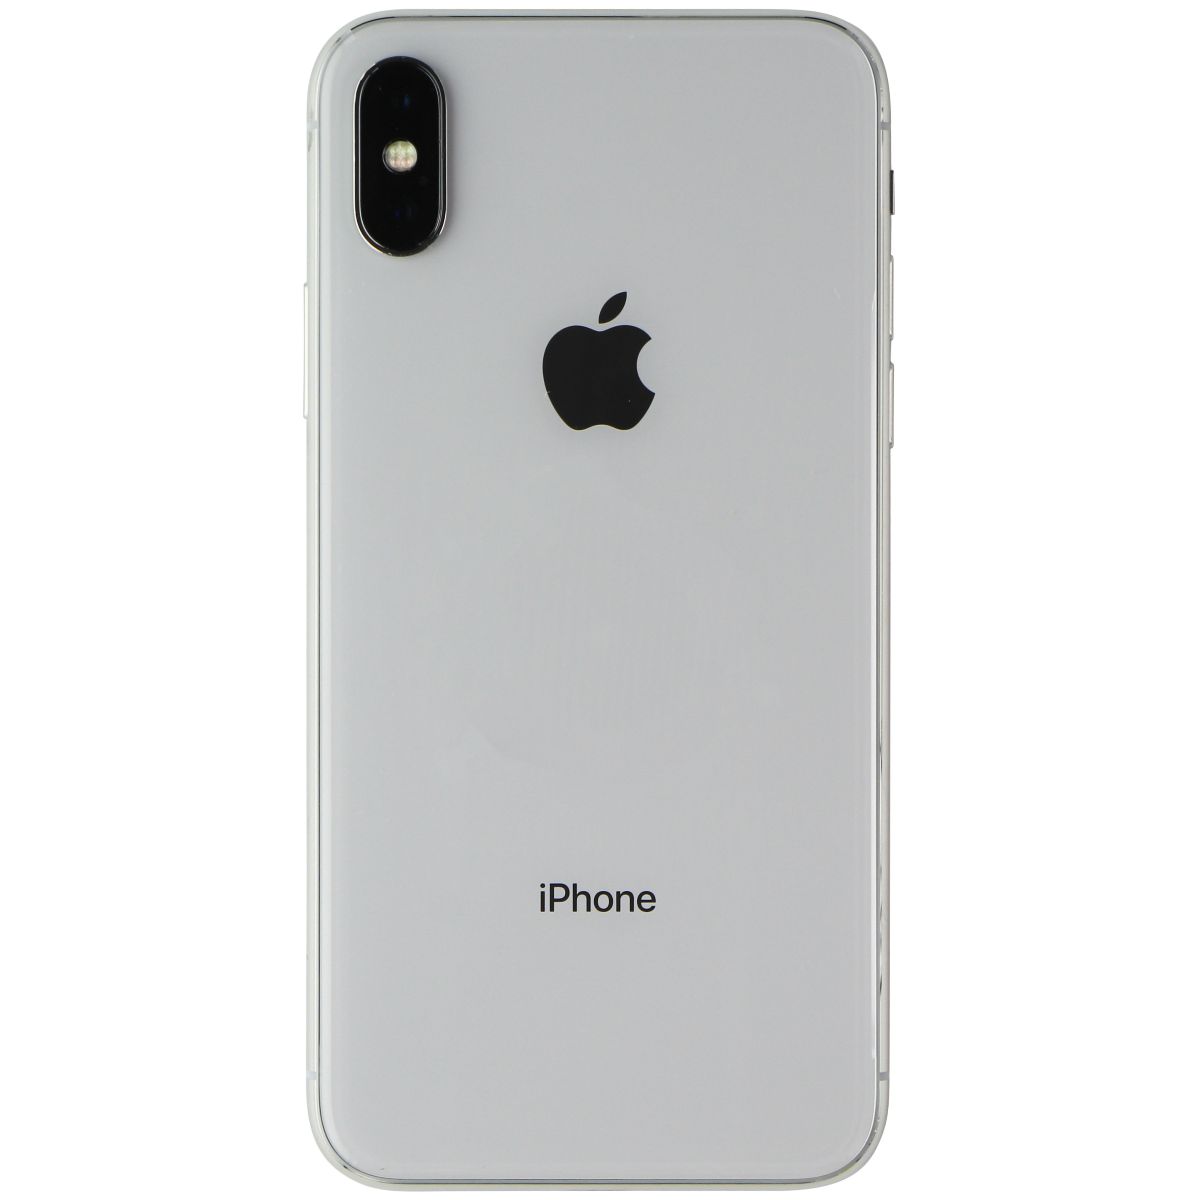 Apple iPhone X (5.8-inch)(A1901) Unlocked - 64GB / Silver - Bad Face ID* Cell Phones & Smartphones Apple    - Simple Cell Bulk Wholesale Pricing - USA Seller